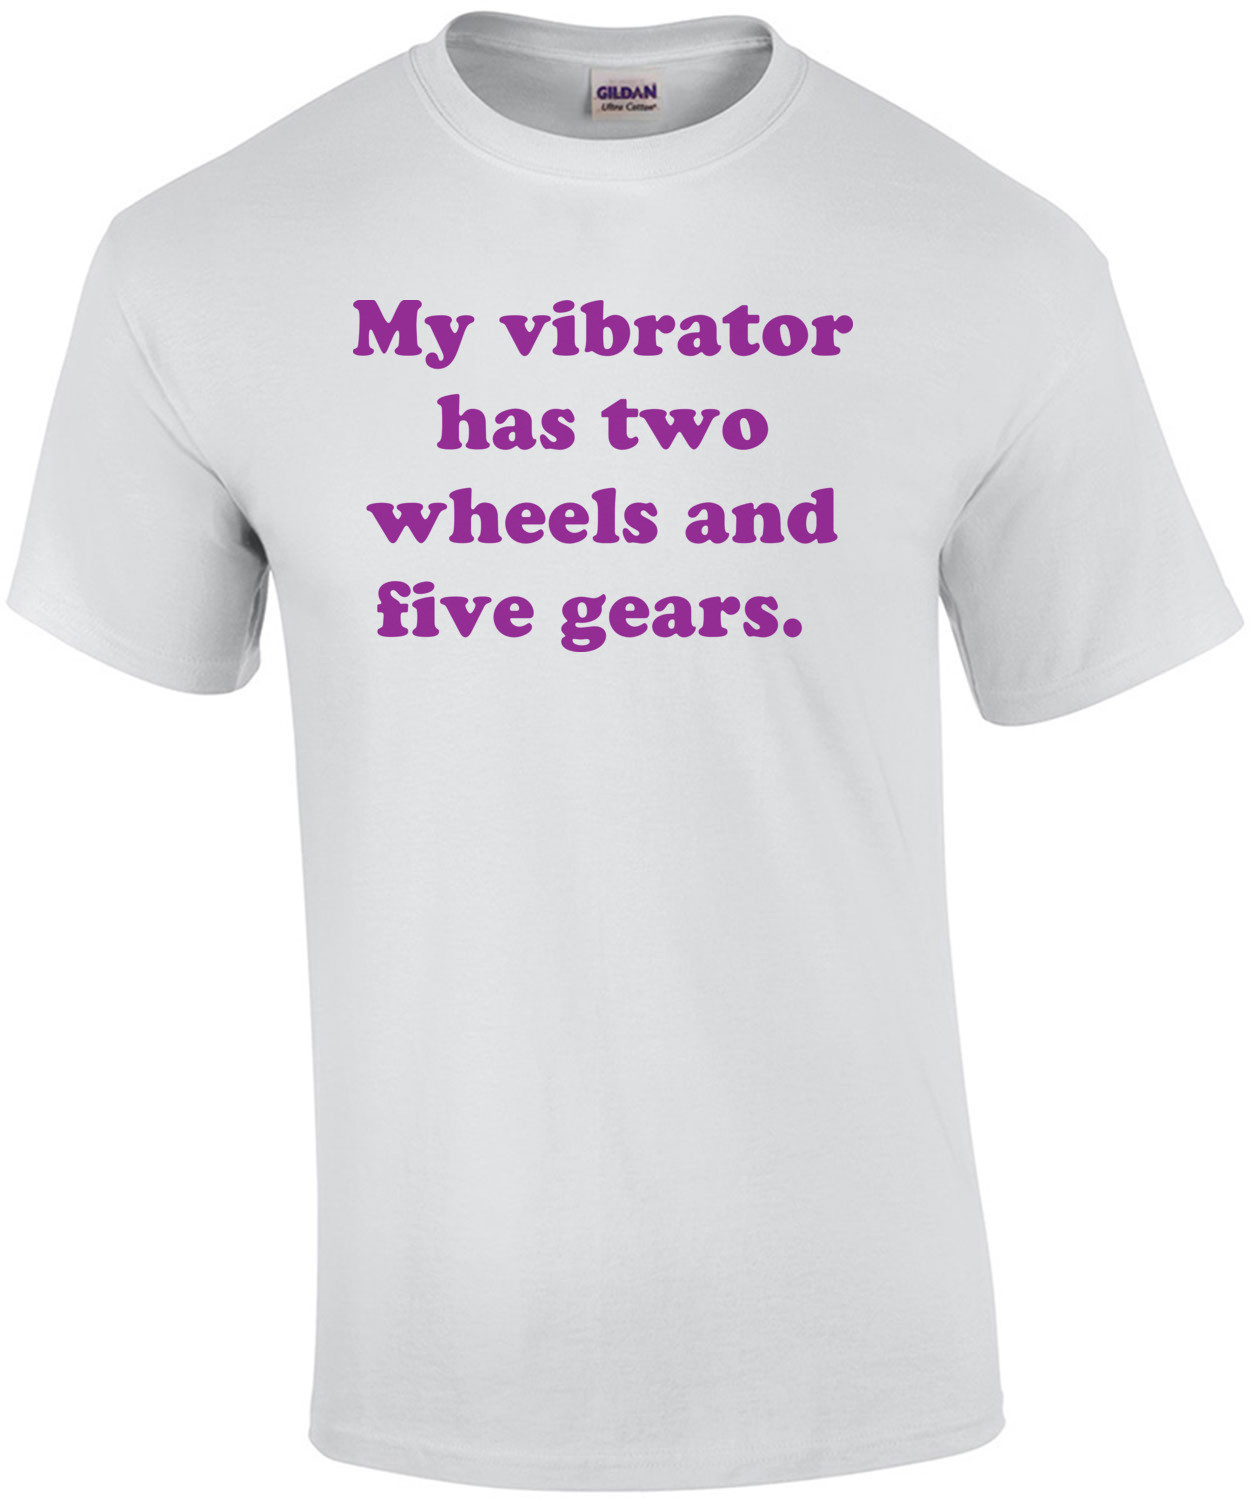 My vibrator has two wheels and five gears. Funny biker shirt.